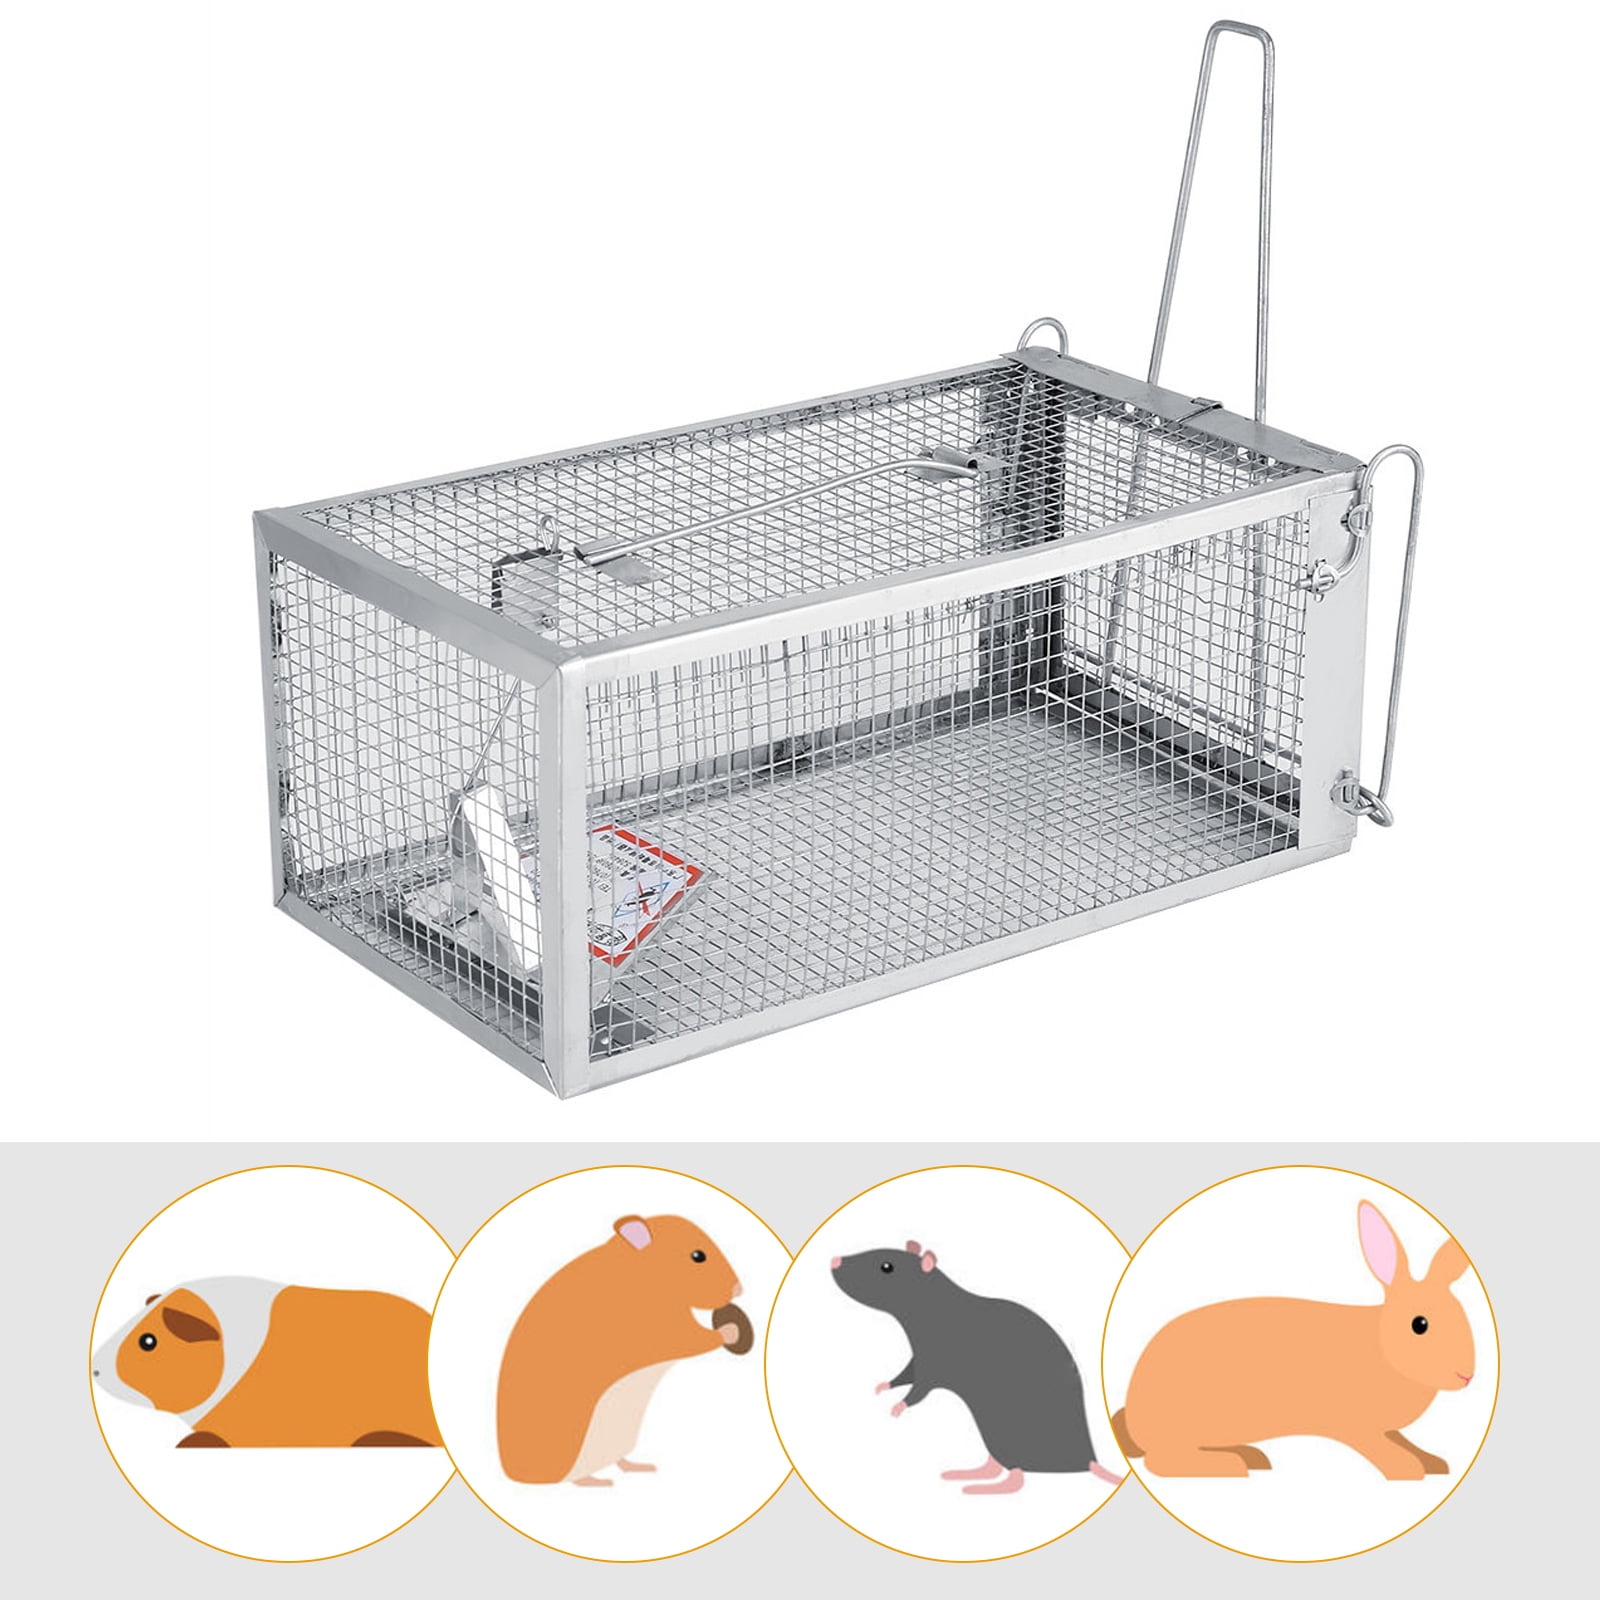 Details about   2X Rat Trap Cage Small Live Animal Pest Rodent Mouse Control Catch Hunting Trap 